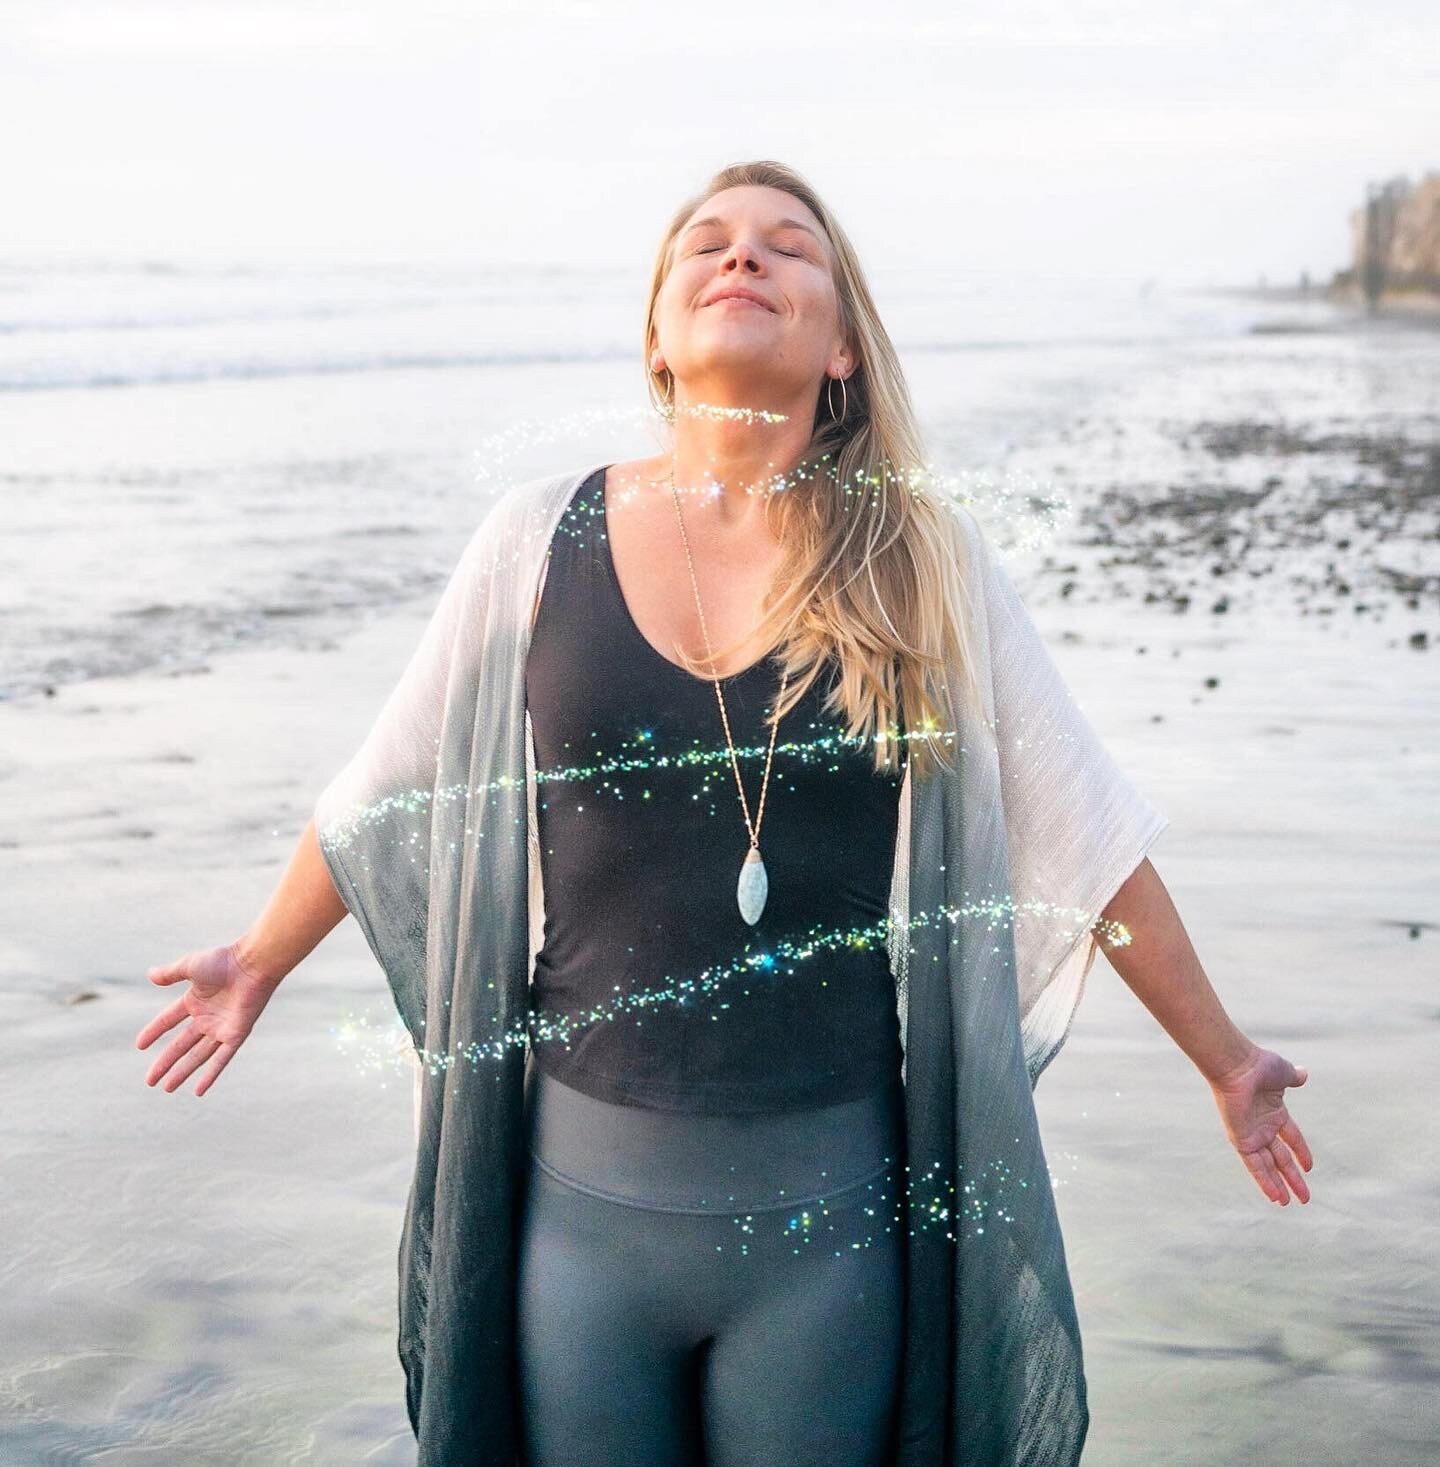 I am surrendering.⁣
I am remembering.⁣
How truly magical we are,⁣
How powerful we are,⁣
How blessed we are. ⁣
⁣
And in the surrender,⁣
An emergence is happening.⁣
A releasing of what no longer serves,⁣
And an undeniable call to step fully in. ⁣
⁣
To 